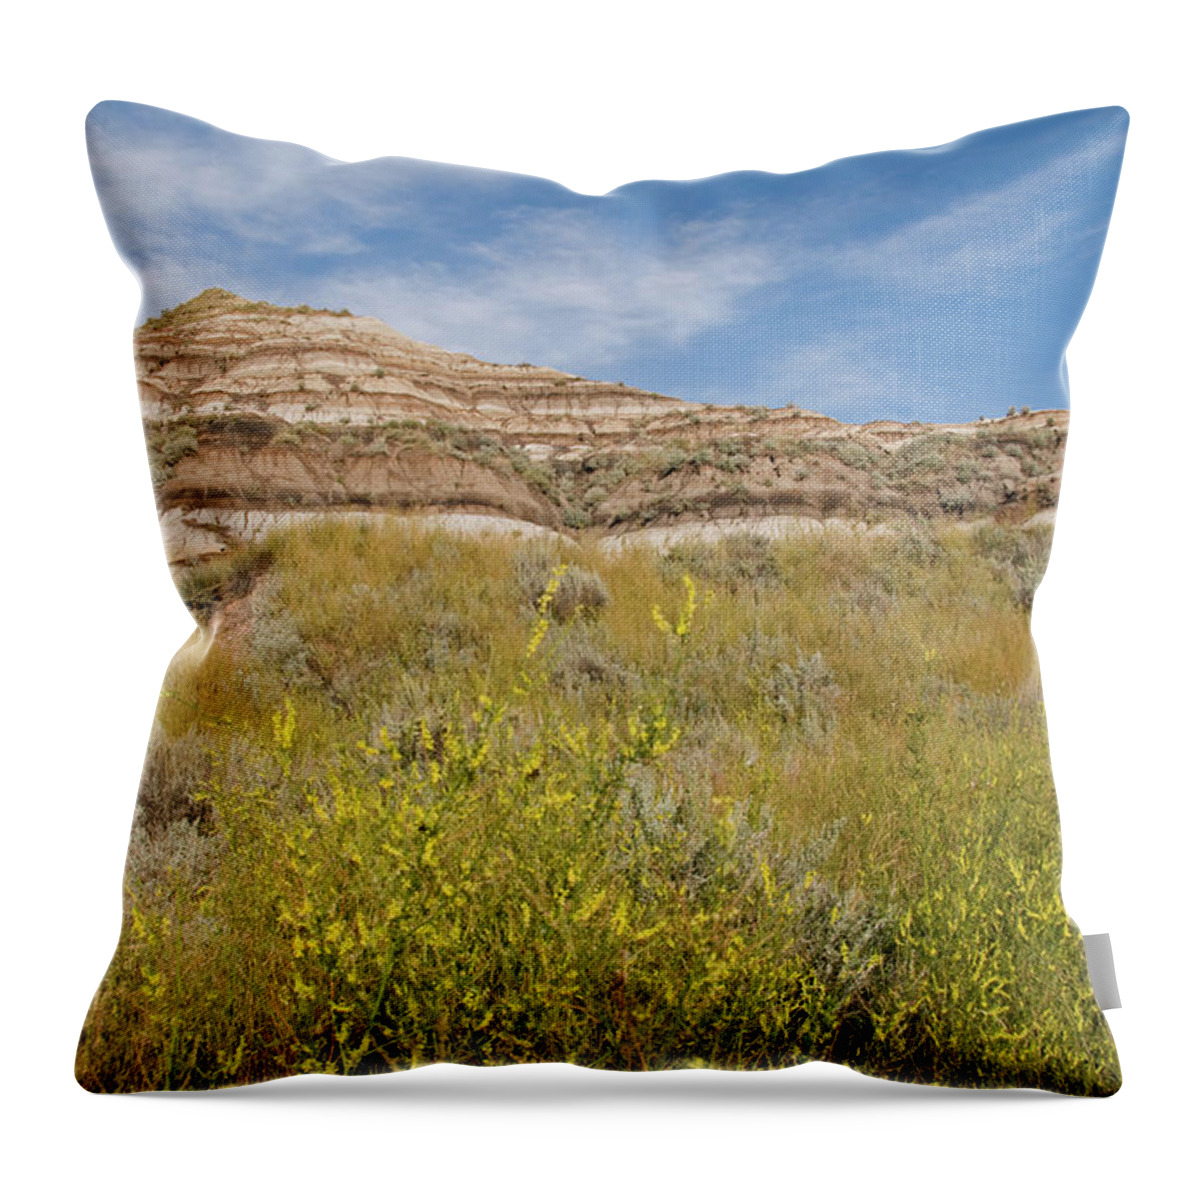 Scenics Throw Pillow featuring the photograph Rock Formations In The Drumeller Valley by Wildroze